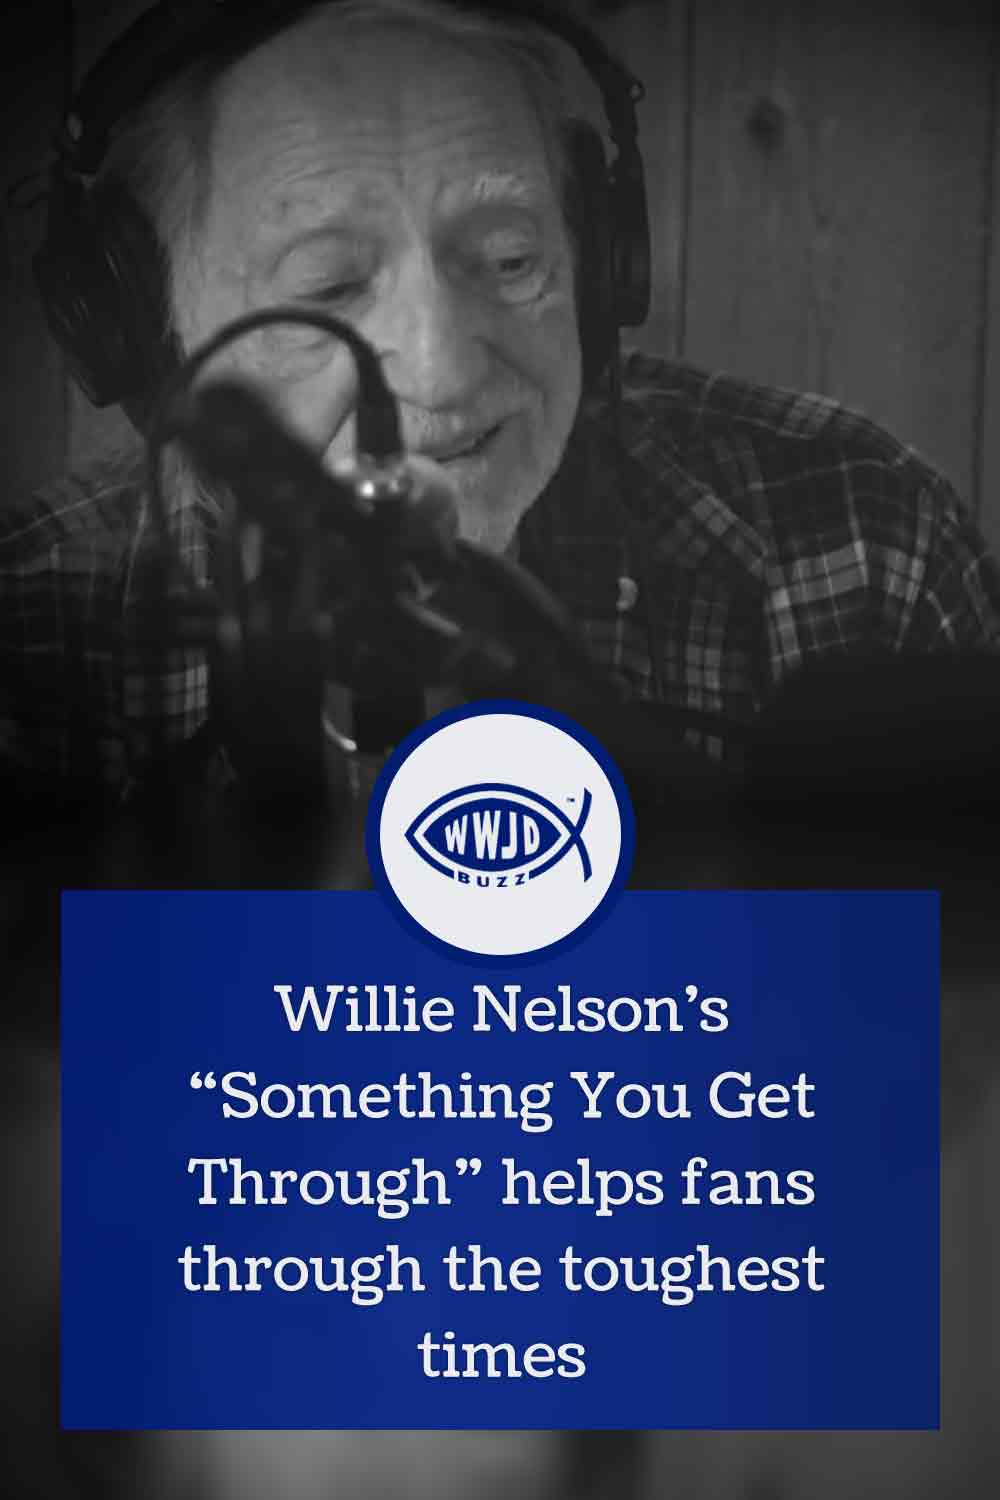 Willie Nelson\'s “Something You Get Through” helps fans through the toughest times